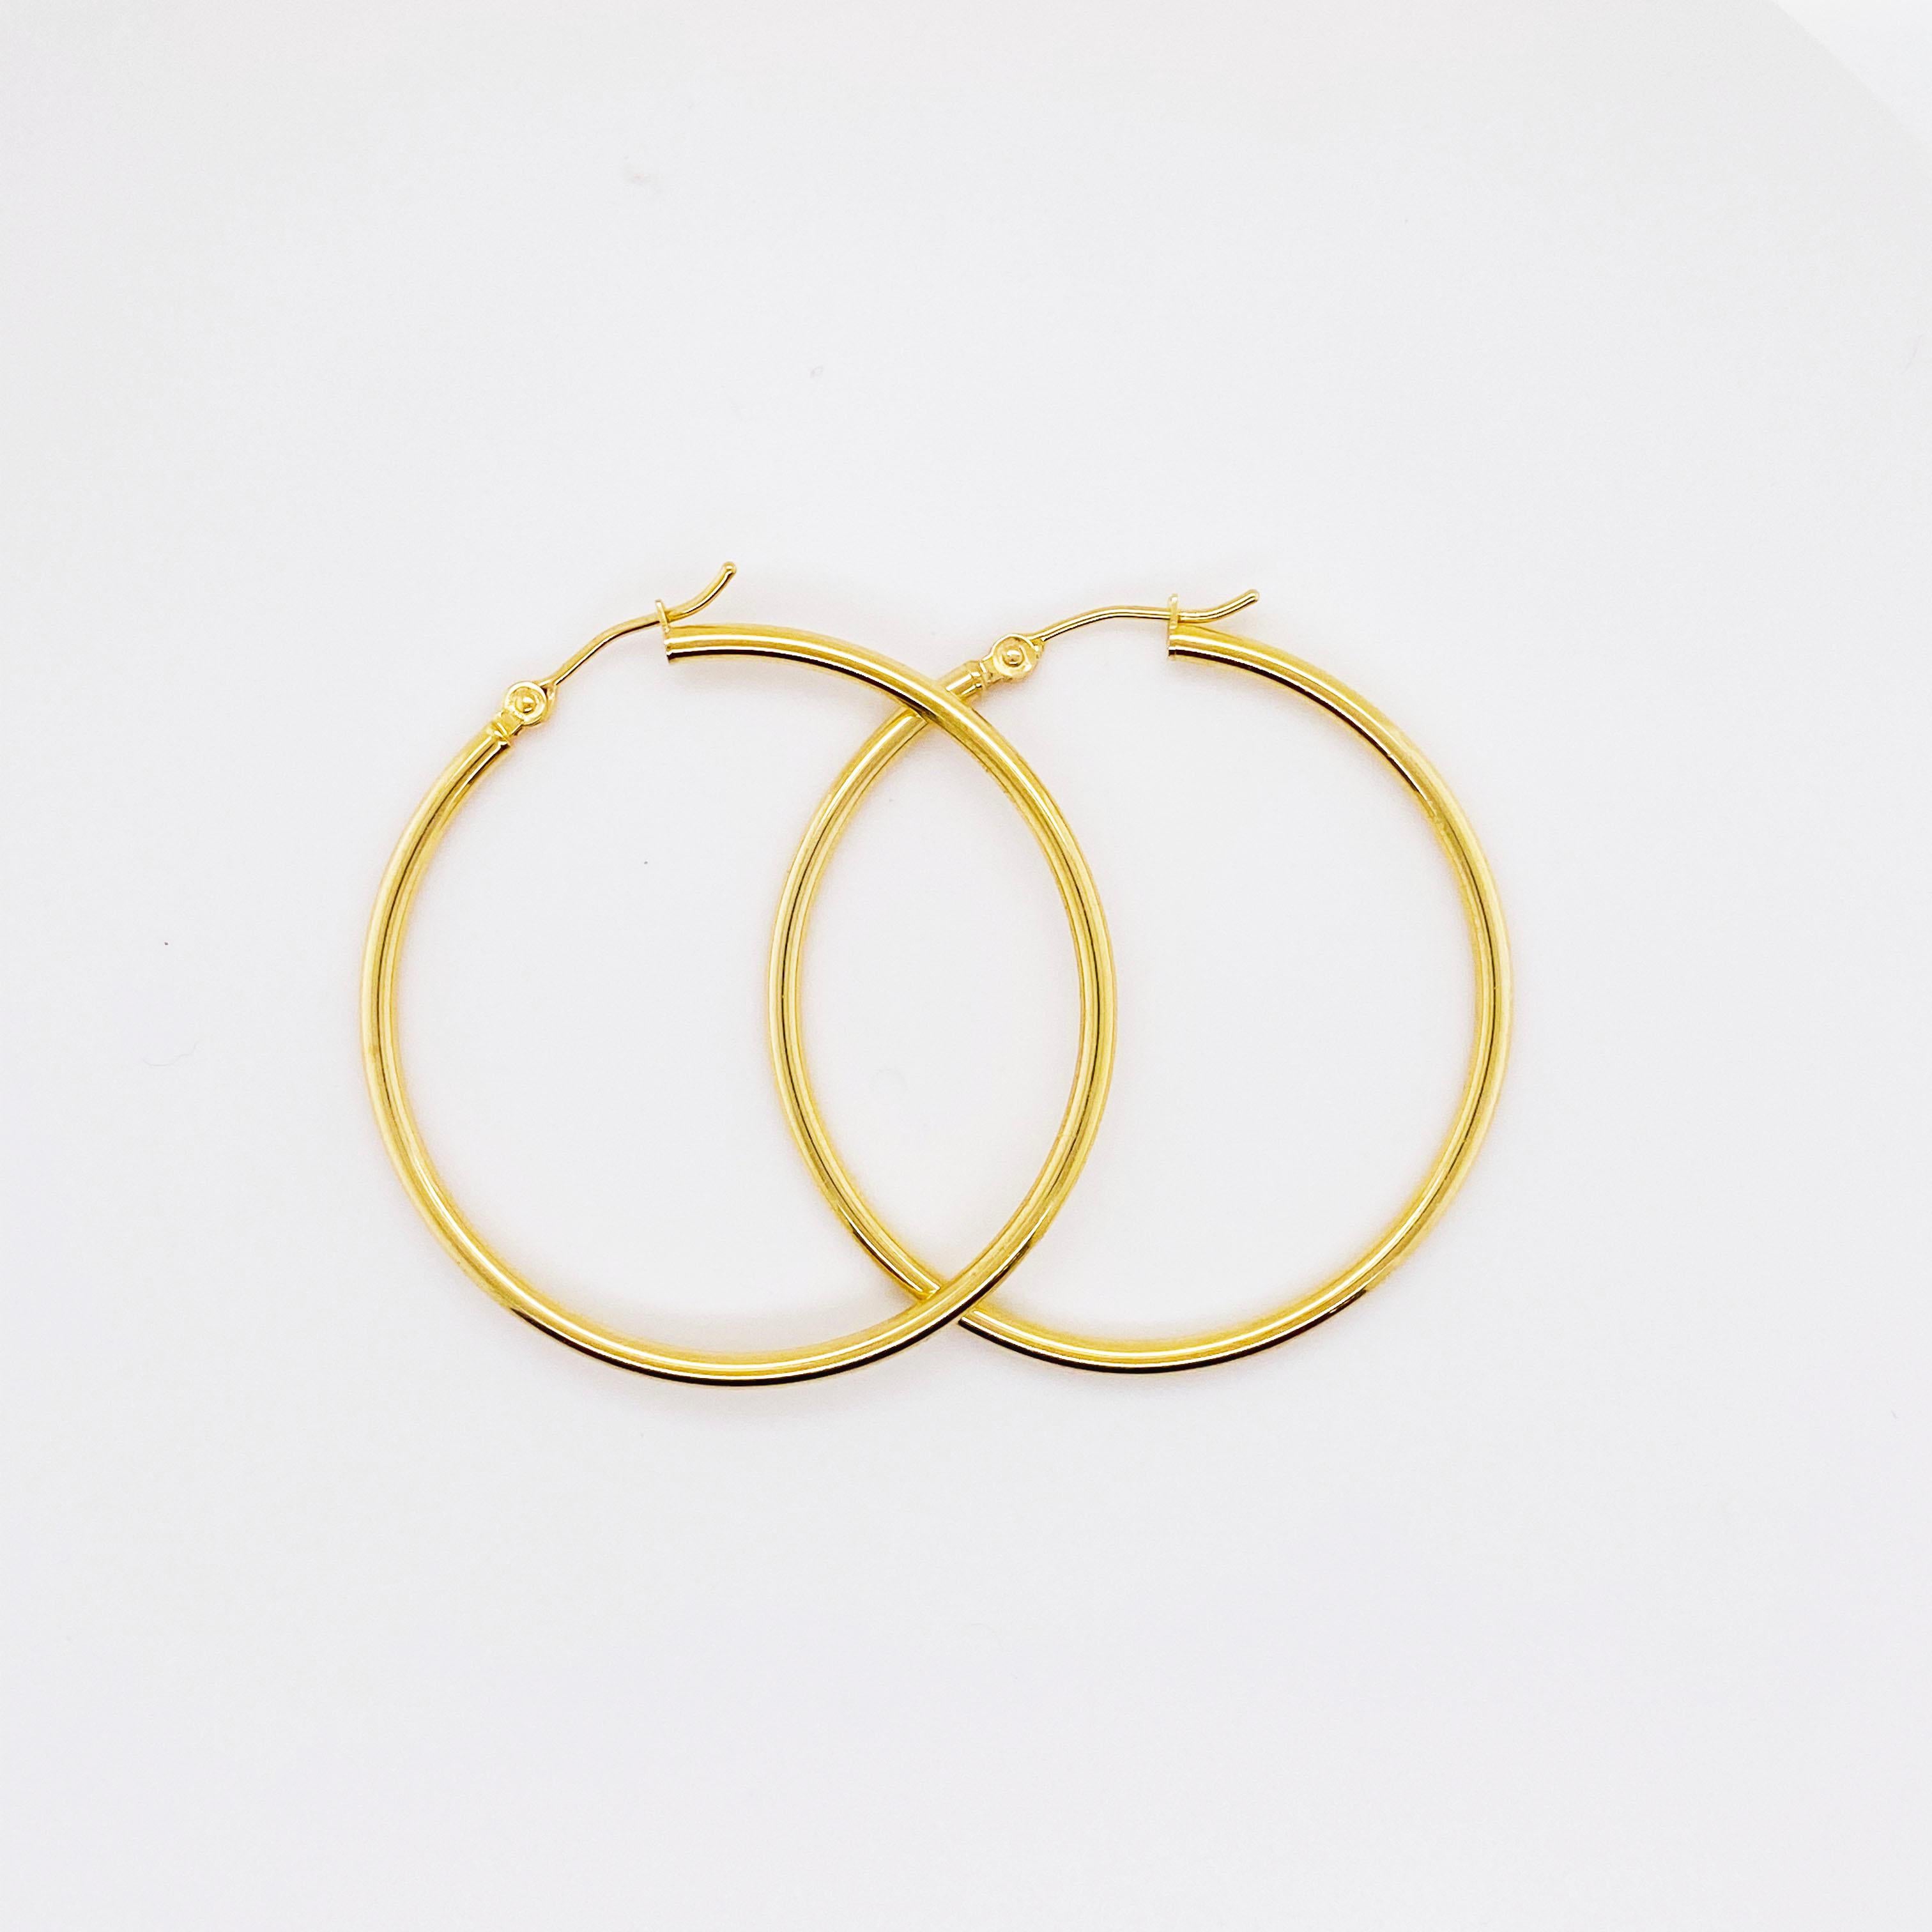 The 14 karat yellow gold hoops are hollow to keep them light on your ears.  They have a handy hinged post so that you never have to worry about an earring back.  The back is already there!
The gold part of the earring is 2 millimeters wide and it is